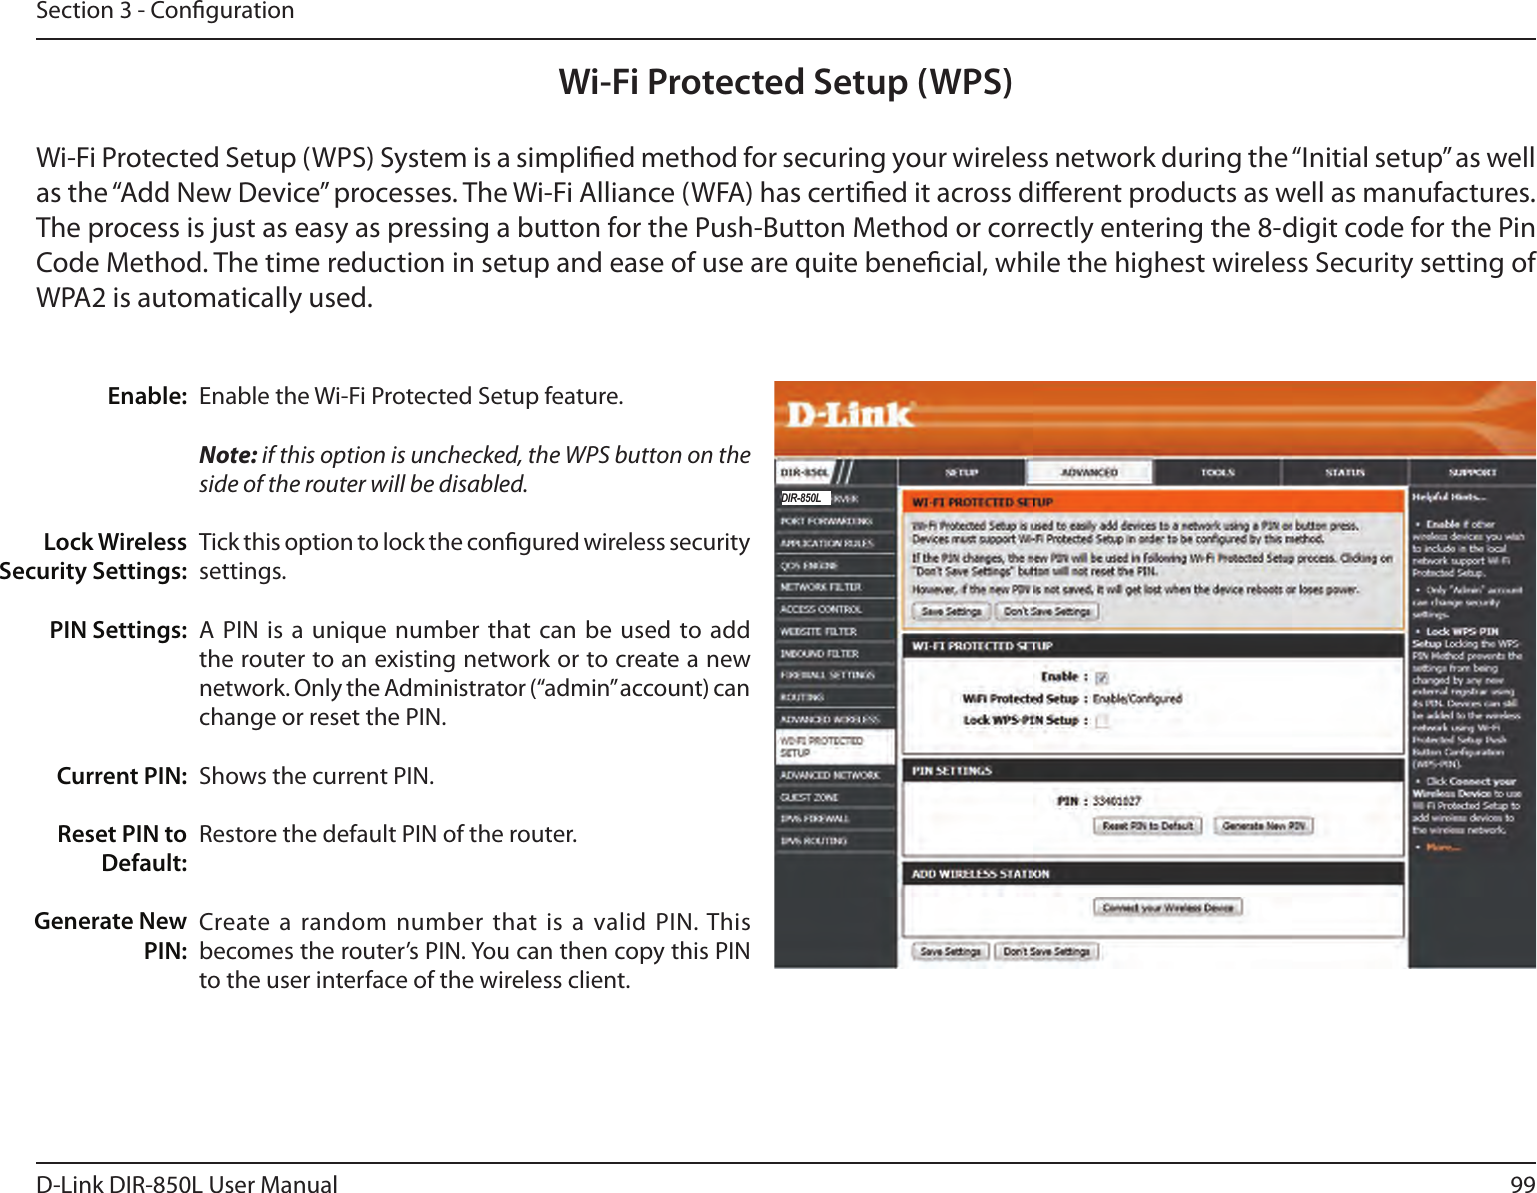 99D-Link DIR-850L User ManualSection 3 - CongurationWi-Fi Protected Setup (WPS)Enable the Wi-Fi Protected Setup feature. Note: if this option is unchecked, the WPS button on the side of the router will be disabled.Tick this option to lock the congured wireless security settings.A PIN  is a  unique number that can be  used to  add the router to an existing network or to create a new network. Only the Administrator (“admin” account) can change or reset the PIN. Shows the current PIN. Restore the default PIN of the router. Create a random number that is a  valid PIN. This becomes the router’s PIN. You can then copy this PIN to the user interface of the wireless client.Enable:Lock Wireless Security Settings:PIN Settings:Current PIN:Reset PIN to Default:Generate New PIN:Wi-Fi Protected Setup (WPS) System is a simplied method for securing your wireless network during the “Initial setup” as well as the “Add New Device” processes. The Wi-Fi Alliance (WFA) has certied it across dierent products as well as manufactures. The process is just as easy as pressing a button for the Push-Button Method or correctly entering the 8-digit code for the Pin Code Method. The time reduction in setup and ease of use are quite benecial, while the highest wireless Security setting of WPA2 is automatically used.DIR-850L